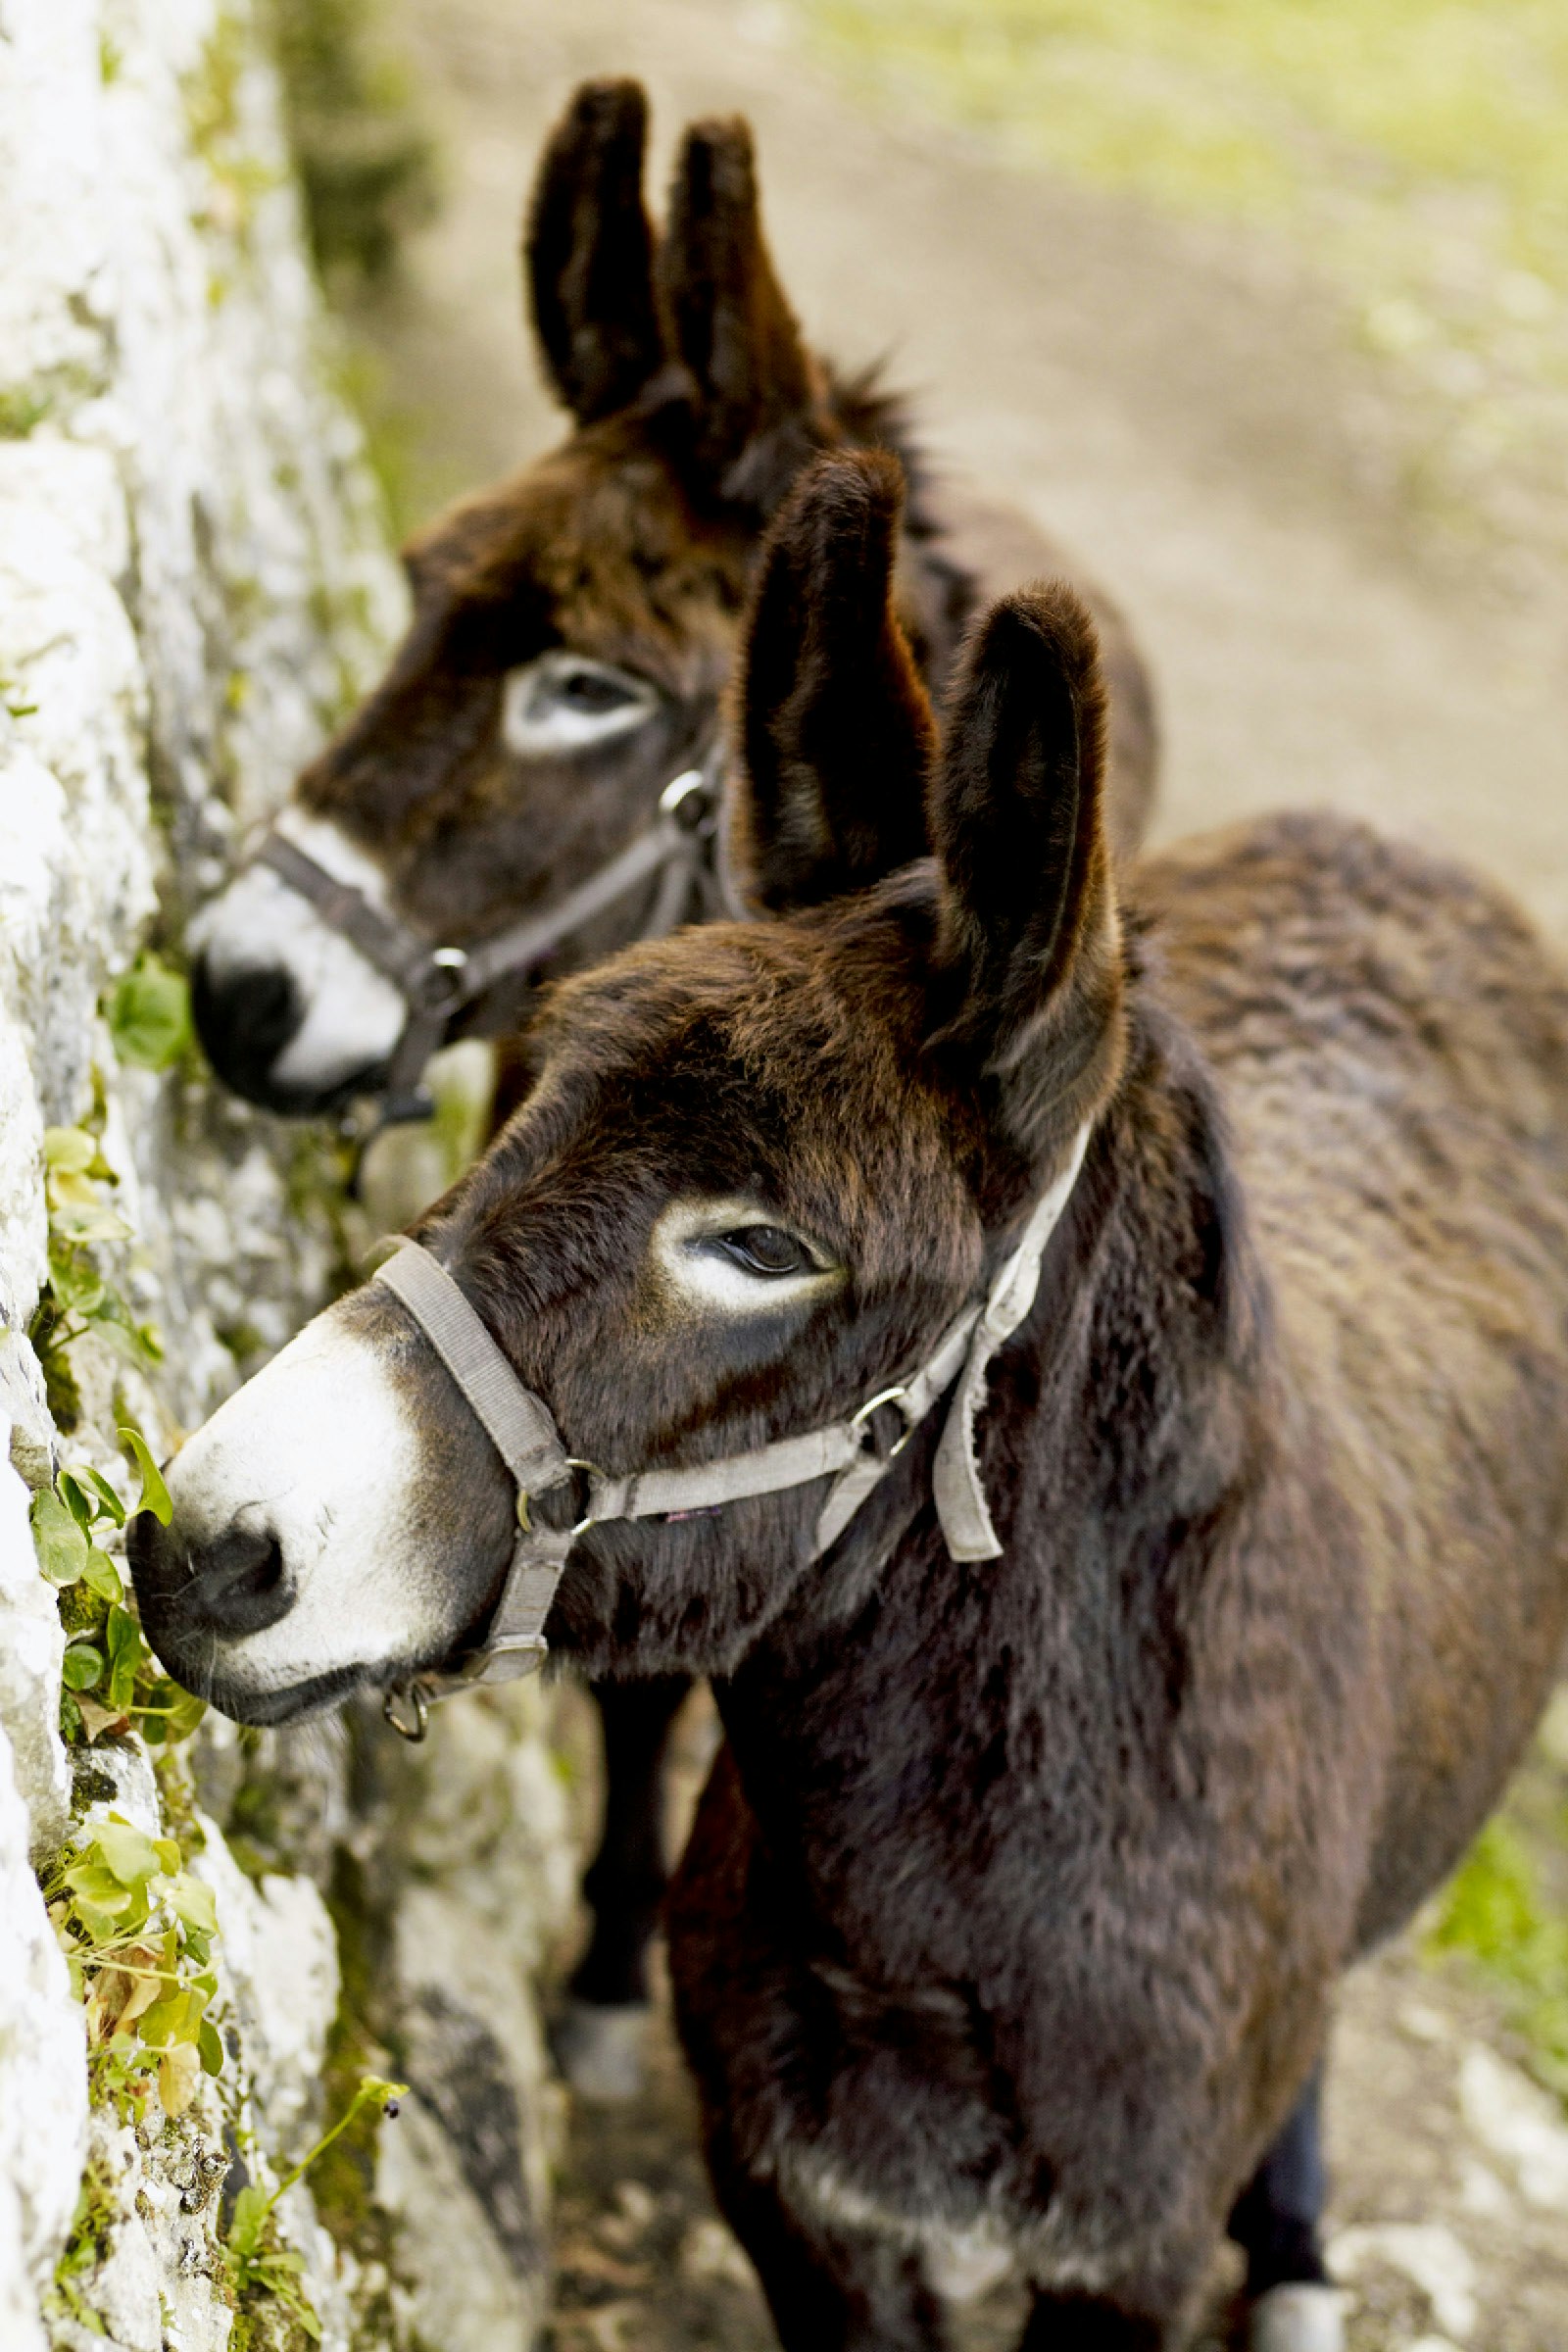 A pair of donkeys stand by an old stone wall